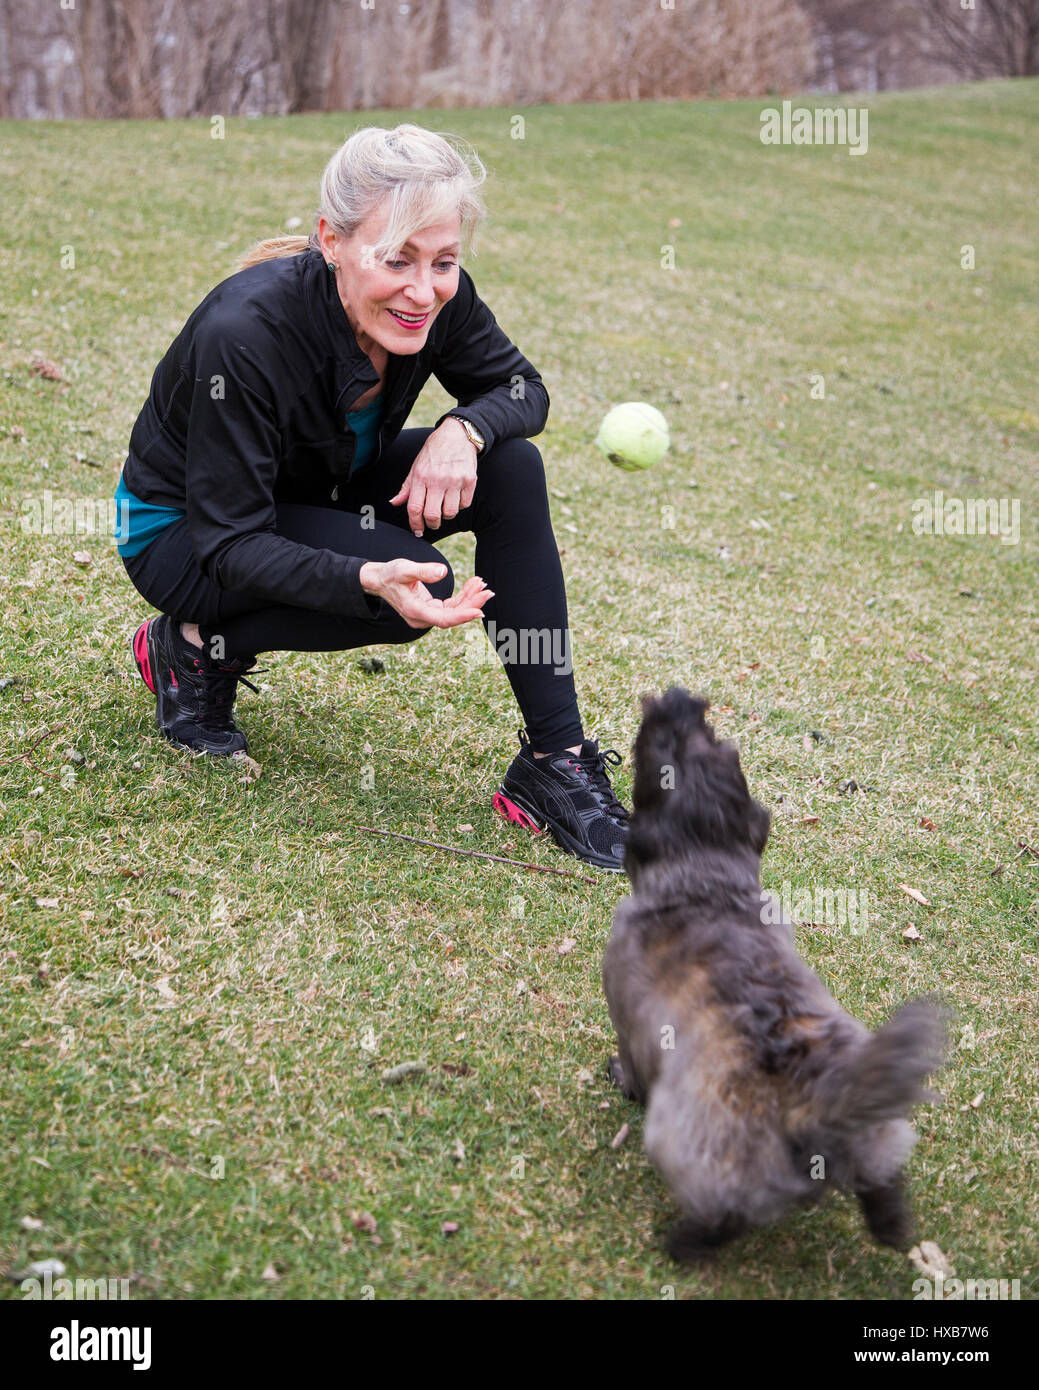 Fit woman playing catch with her dog Stock Photo